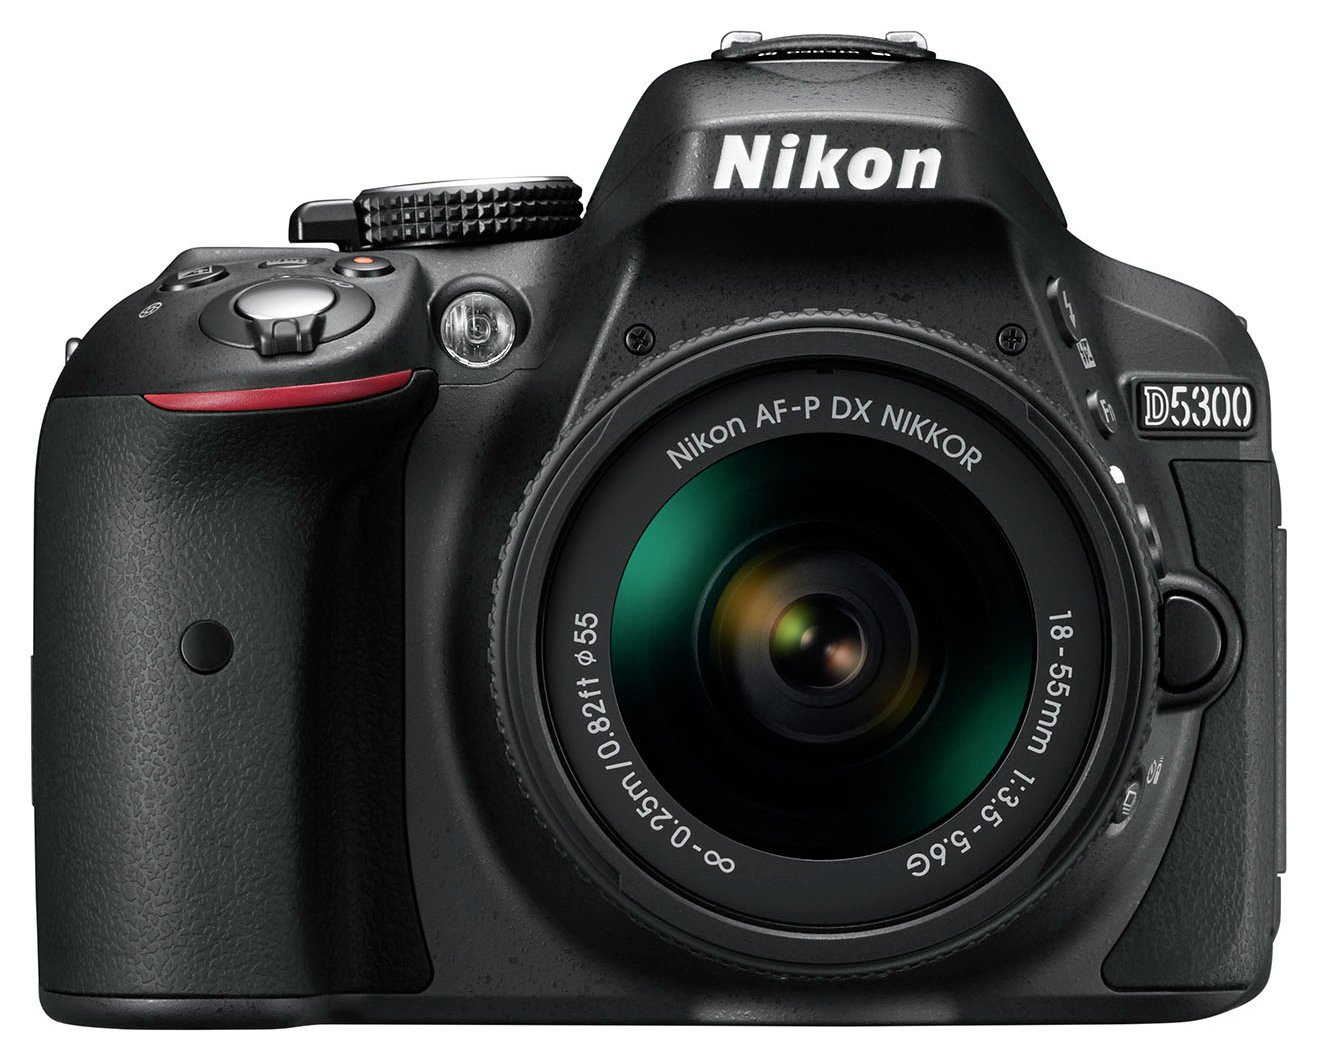 Nikon D5300 DSLR Camera with 18-55mm Wide Angle Lens